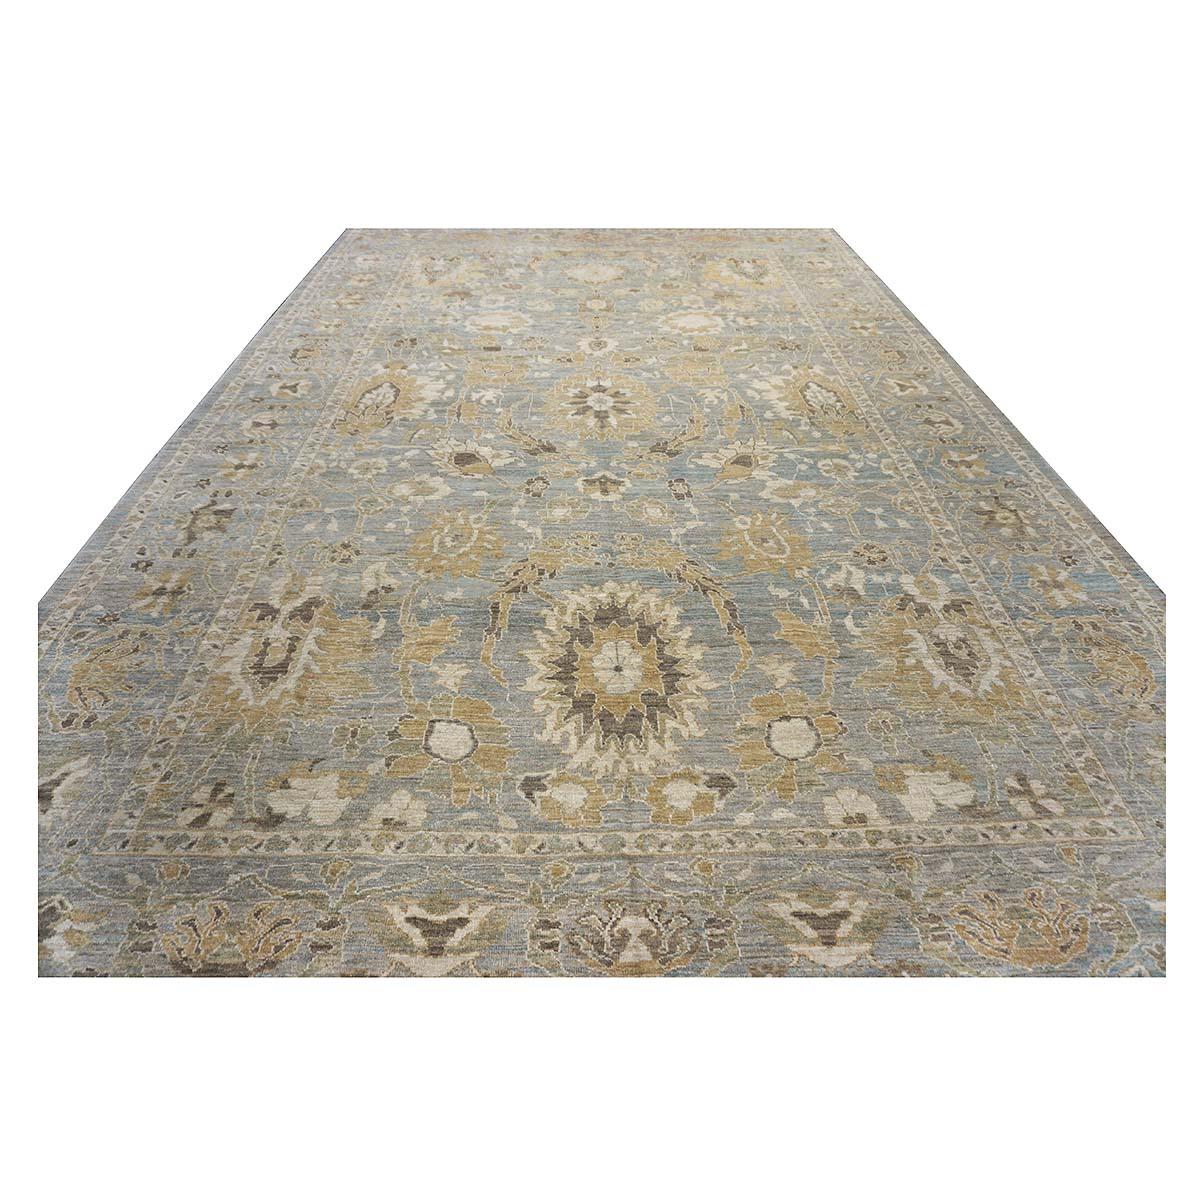 Other Oversized Persian Sultanabad Master 12x18 Blue, Grey, & Tan Handmade Area Rug For Sale